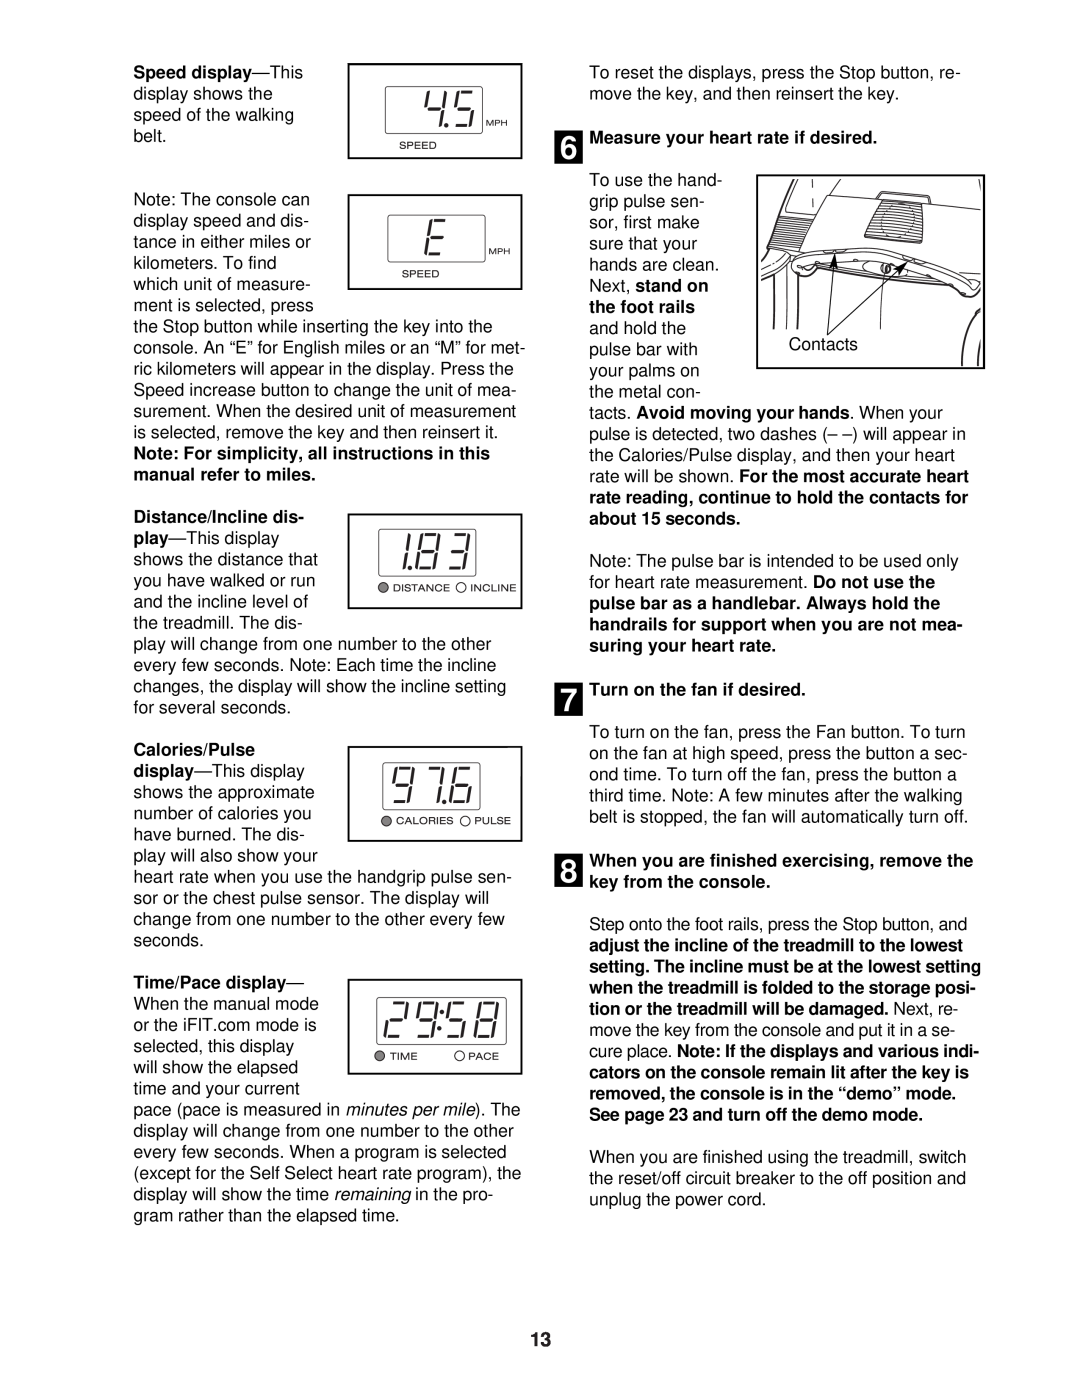 ProForm DTL72940 Speed display-This, Note For simplicity, all instructions in this manual refer to miles, Calories/Pulse 